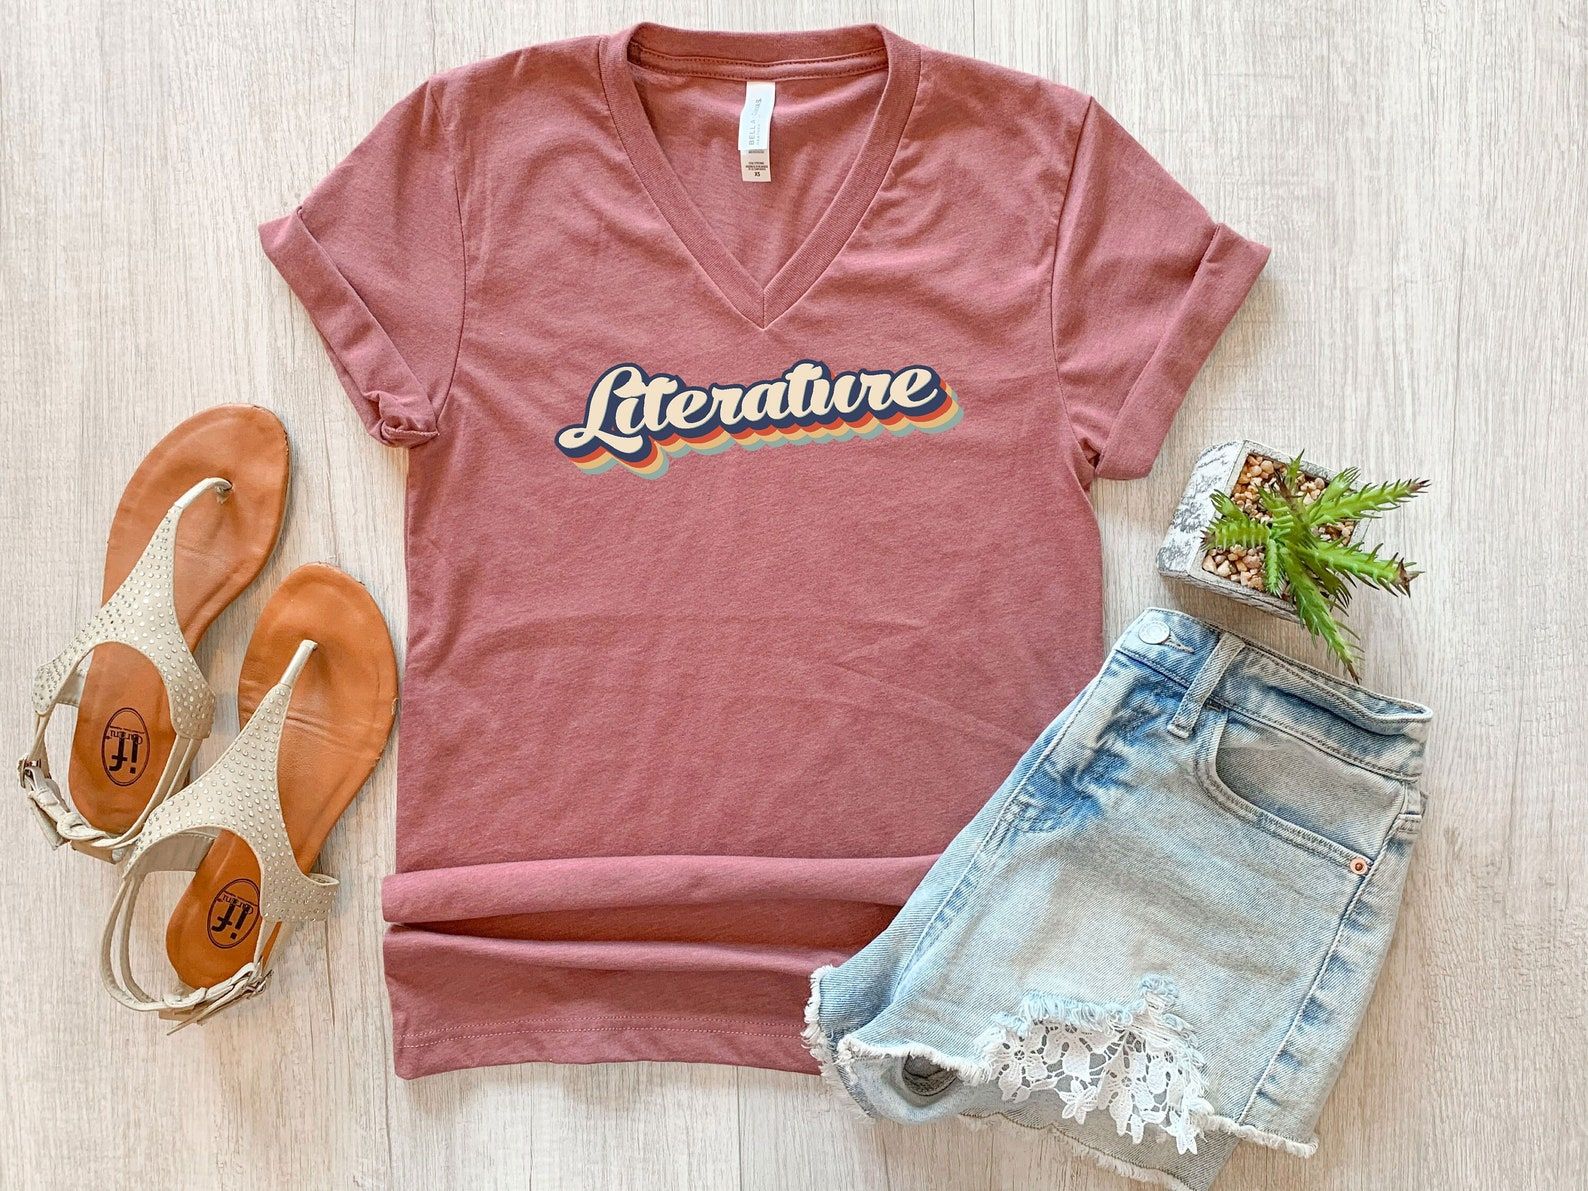 Image of a pink v-neck shirt with the word 